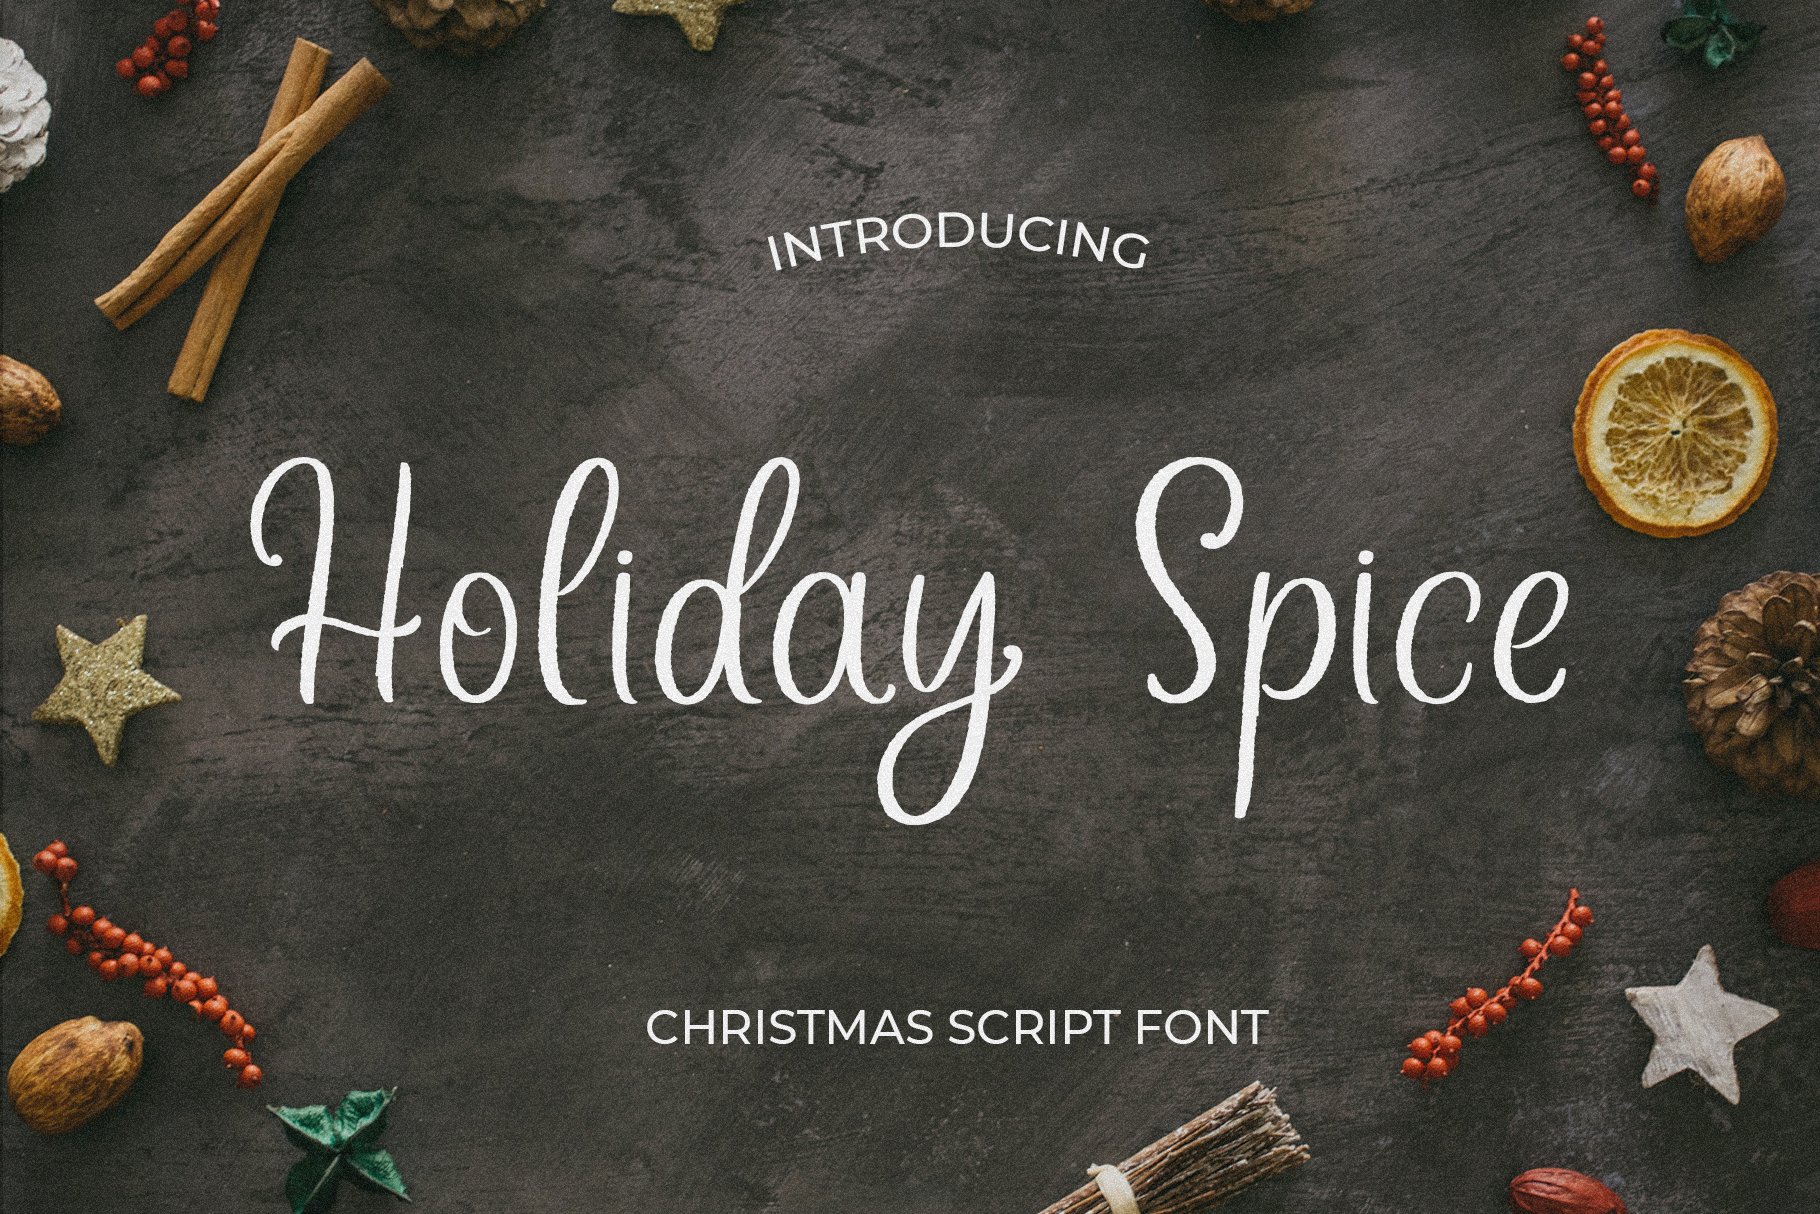 Holiday spice - Christmas script cover image.